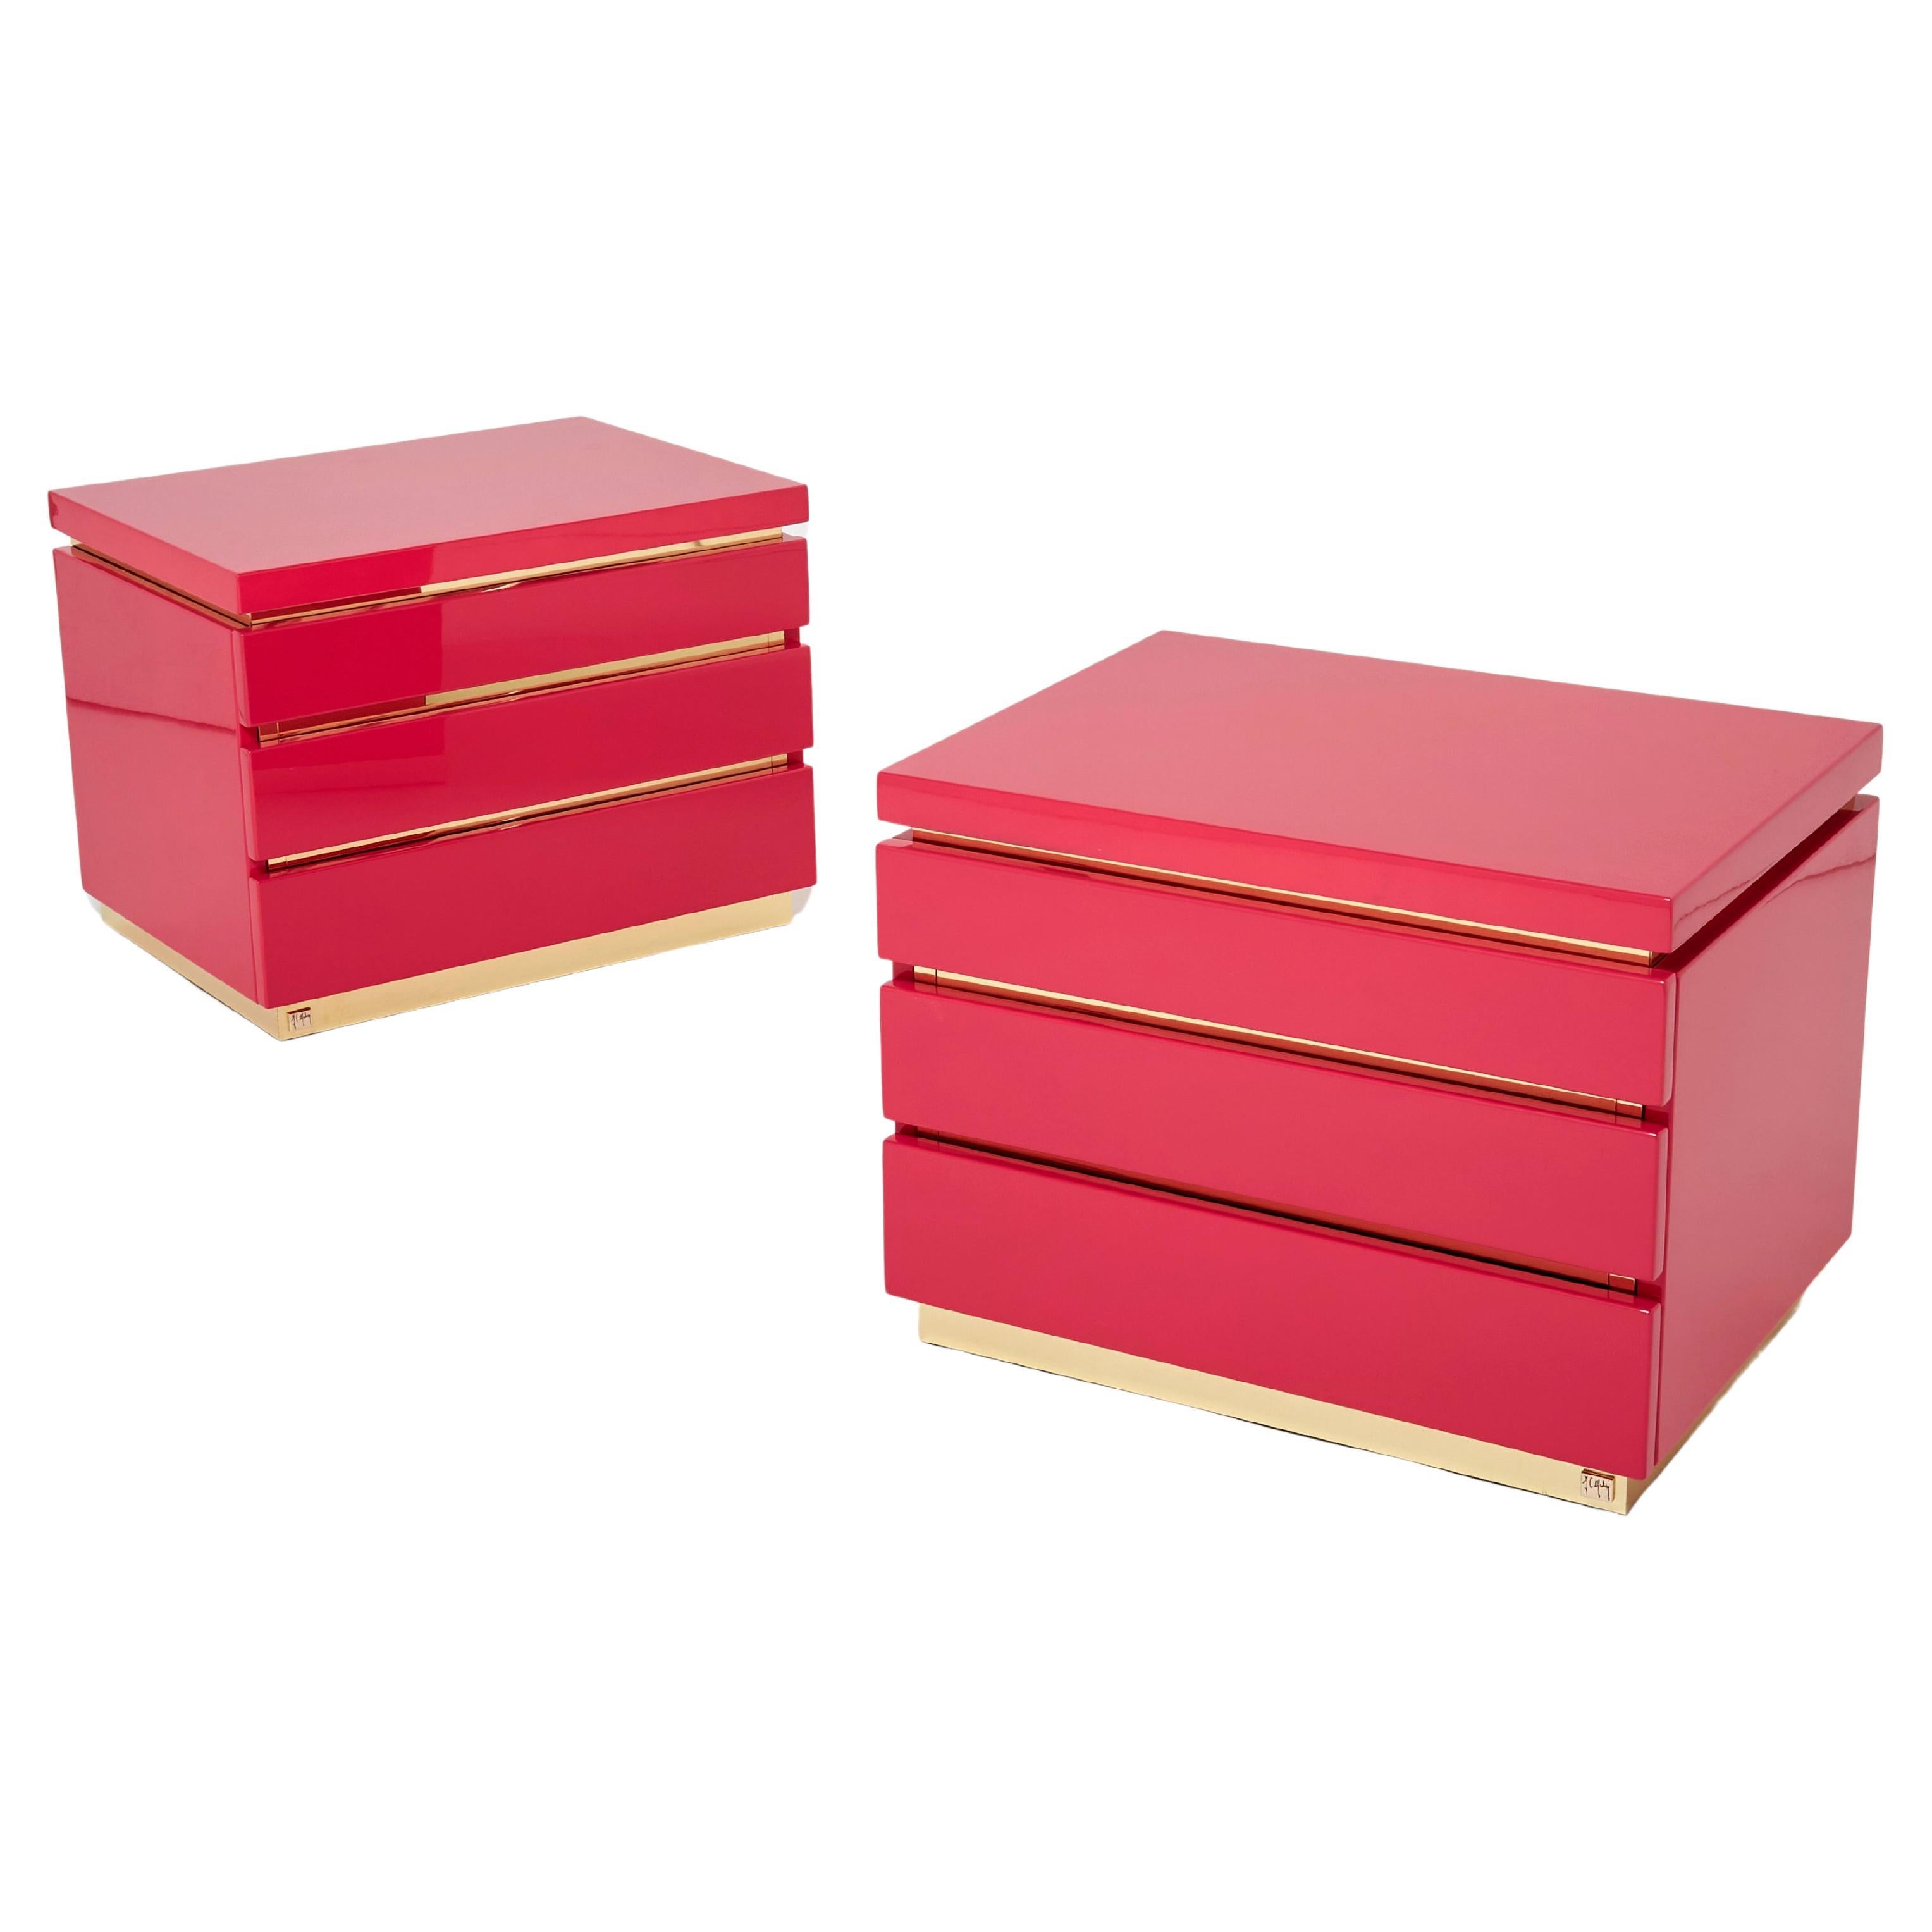 Pair of Jean-Claude Mahey Pink Lacquered Brass Nightstands, 1970s For Sale